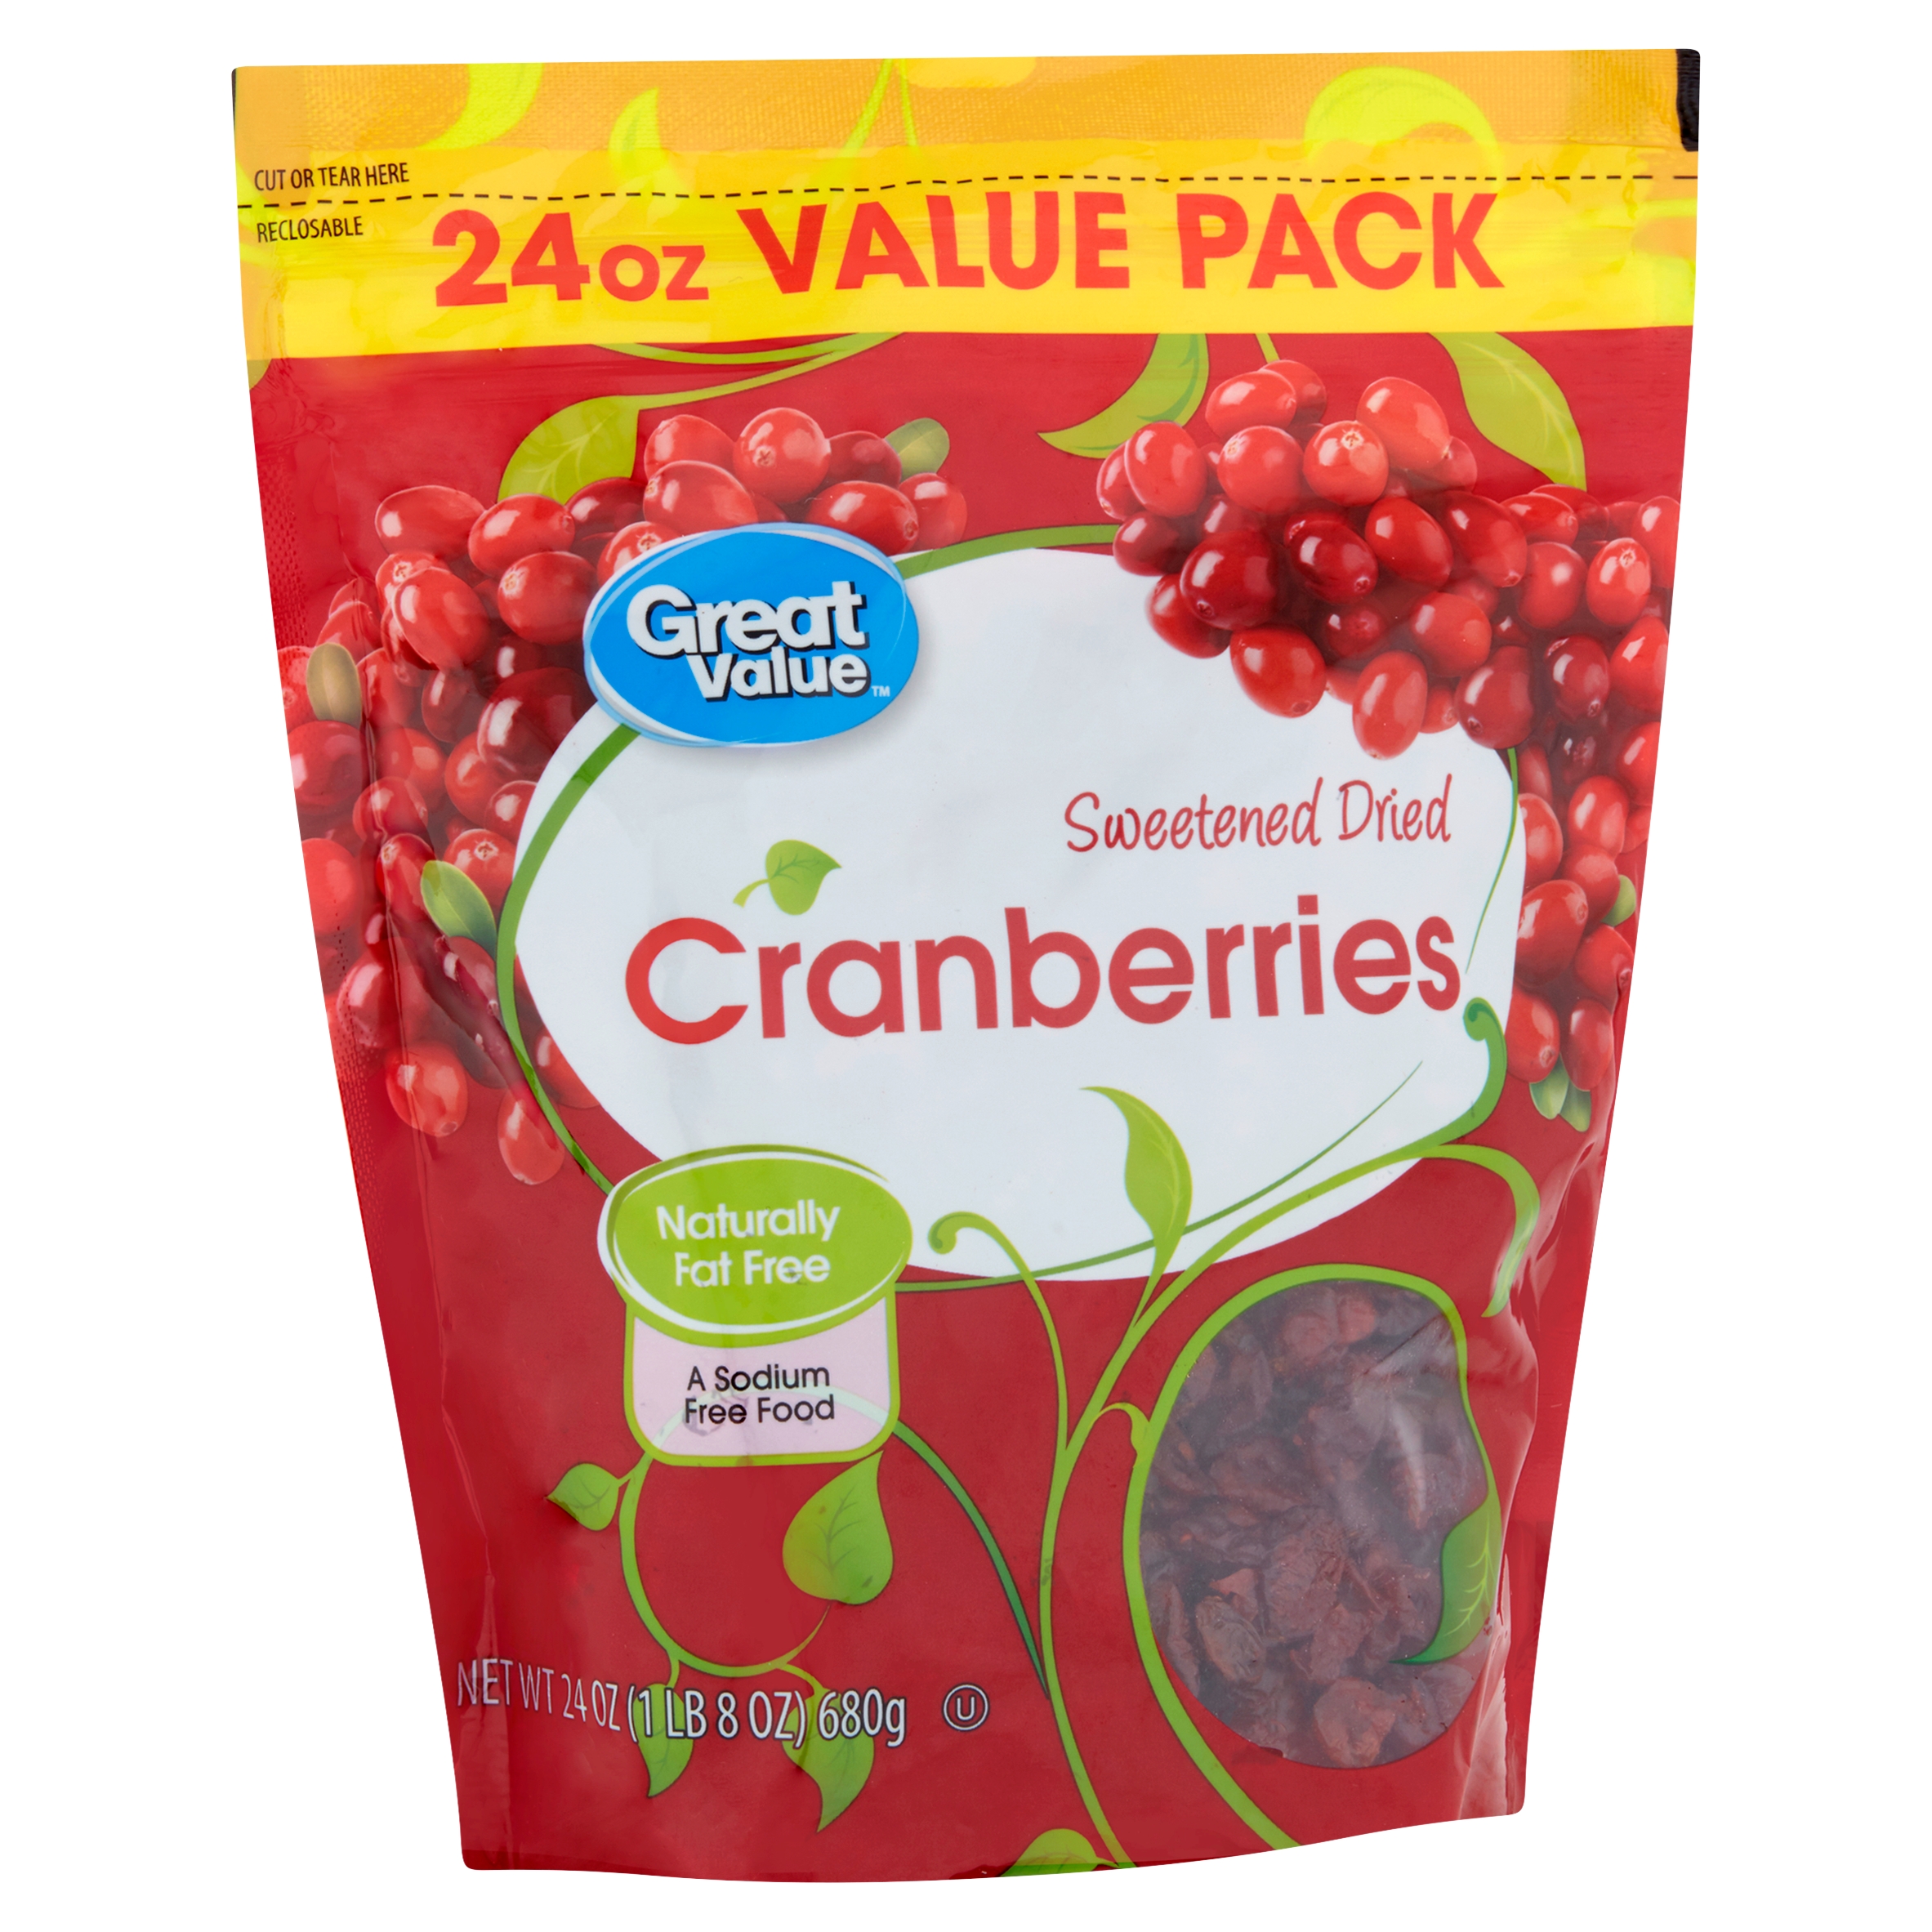 Great Value Dried Cranberries Sweetened 24 Oz Value Pack Image